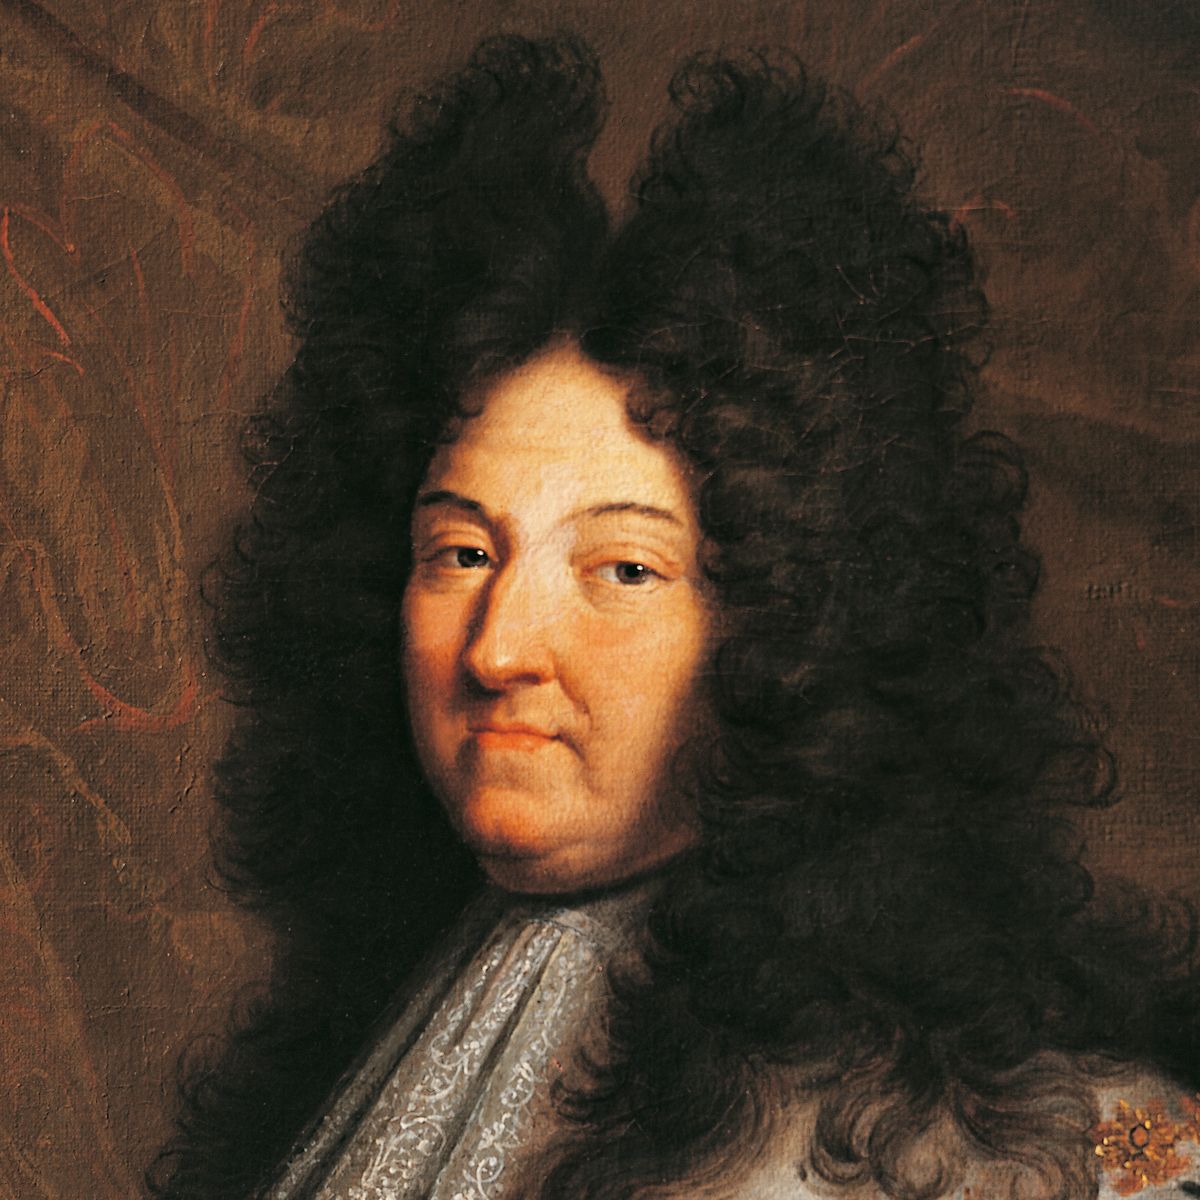 Louis, Louis: How to Tell the Difference Between Louis XIV, Louis